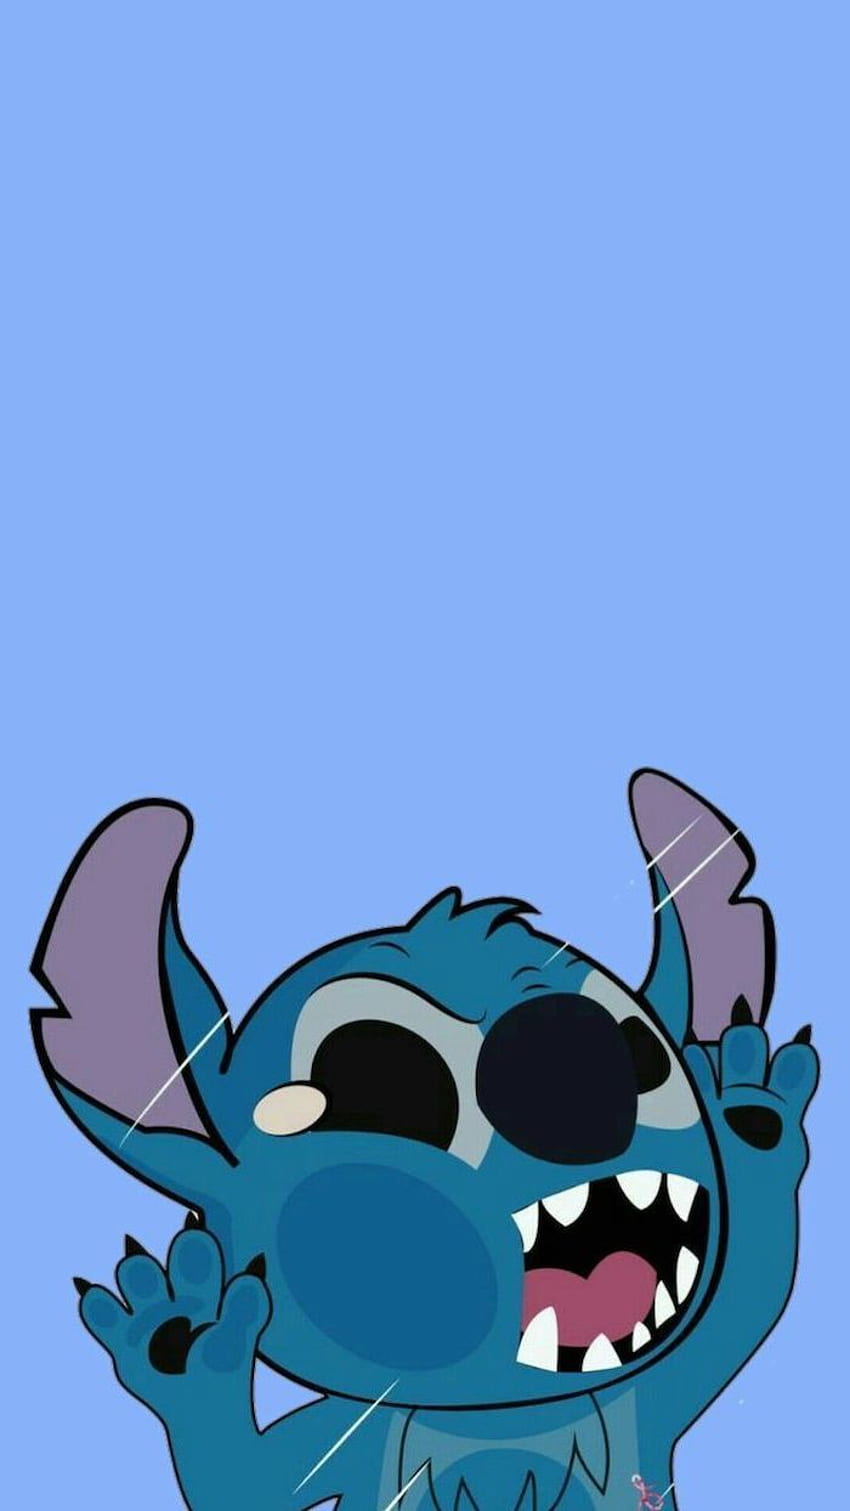 for Funny To Get You In a Good Mood, Don't Touch My Stitch HD phone wallpaper